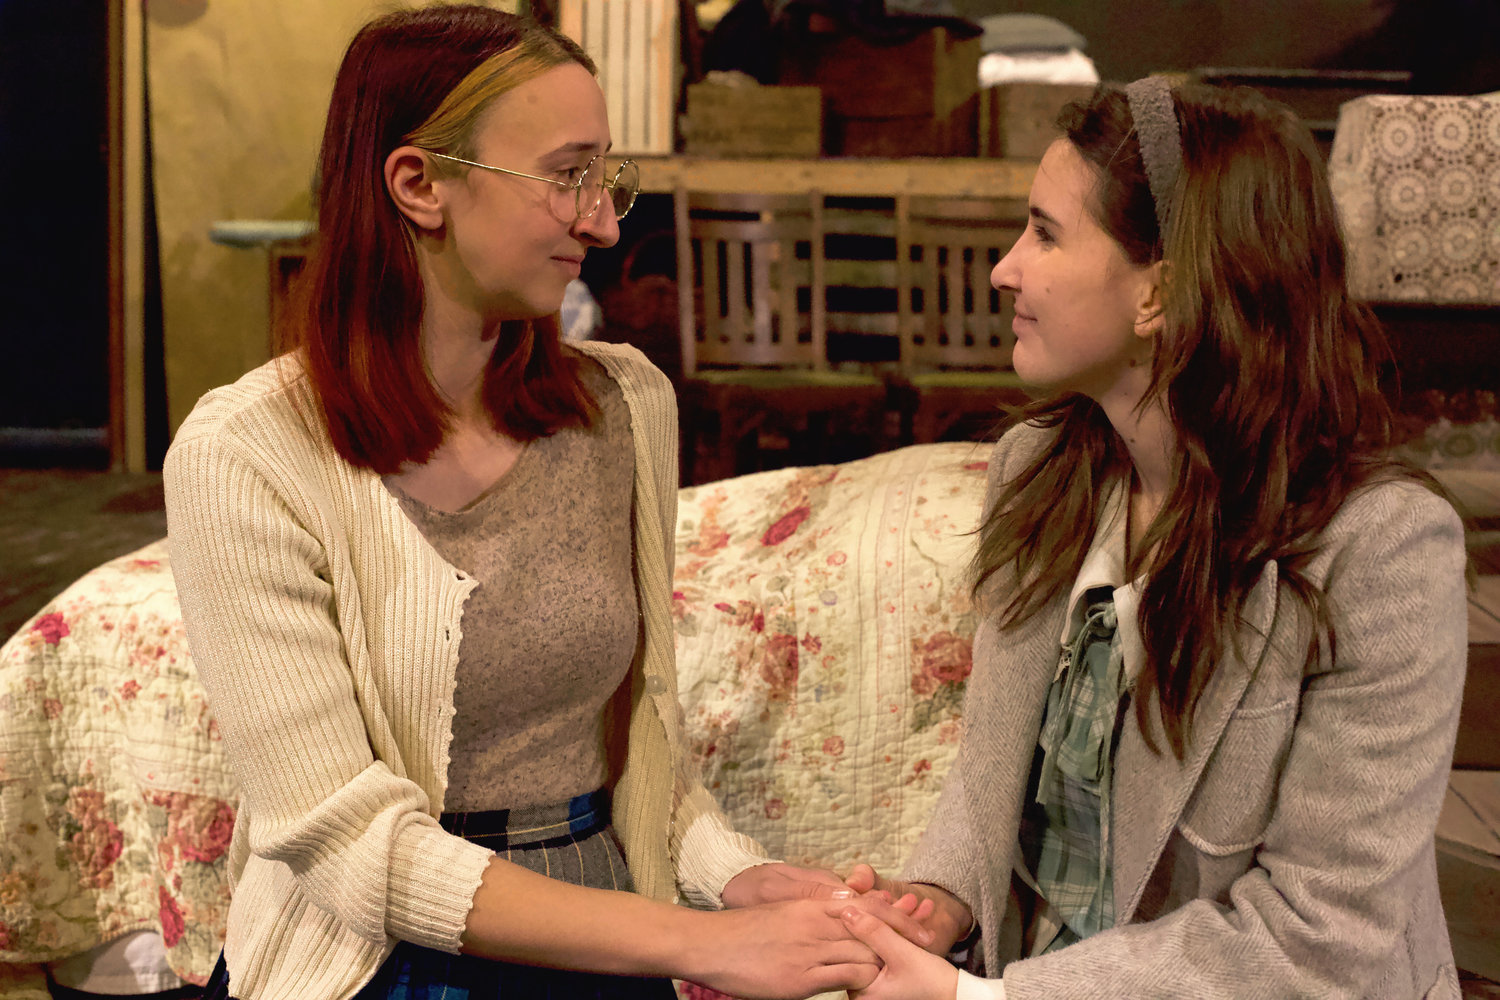 Lizzie Conner as Margot Frank, left, and Ruby Stanton as Anne Frank perform during a rehearsal of “The Diary of Anne Frank” at the Evergreen Playhouse in Centralia last week.